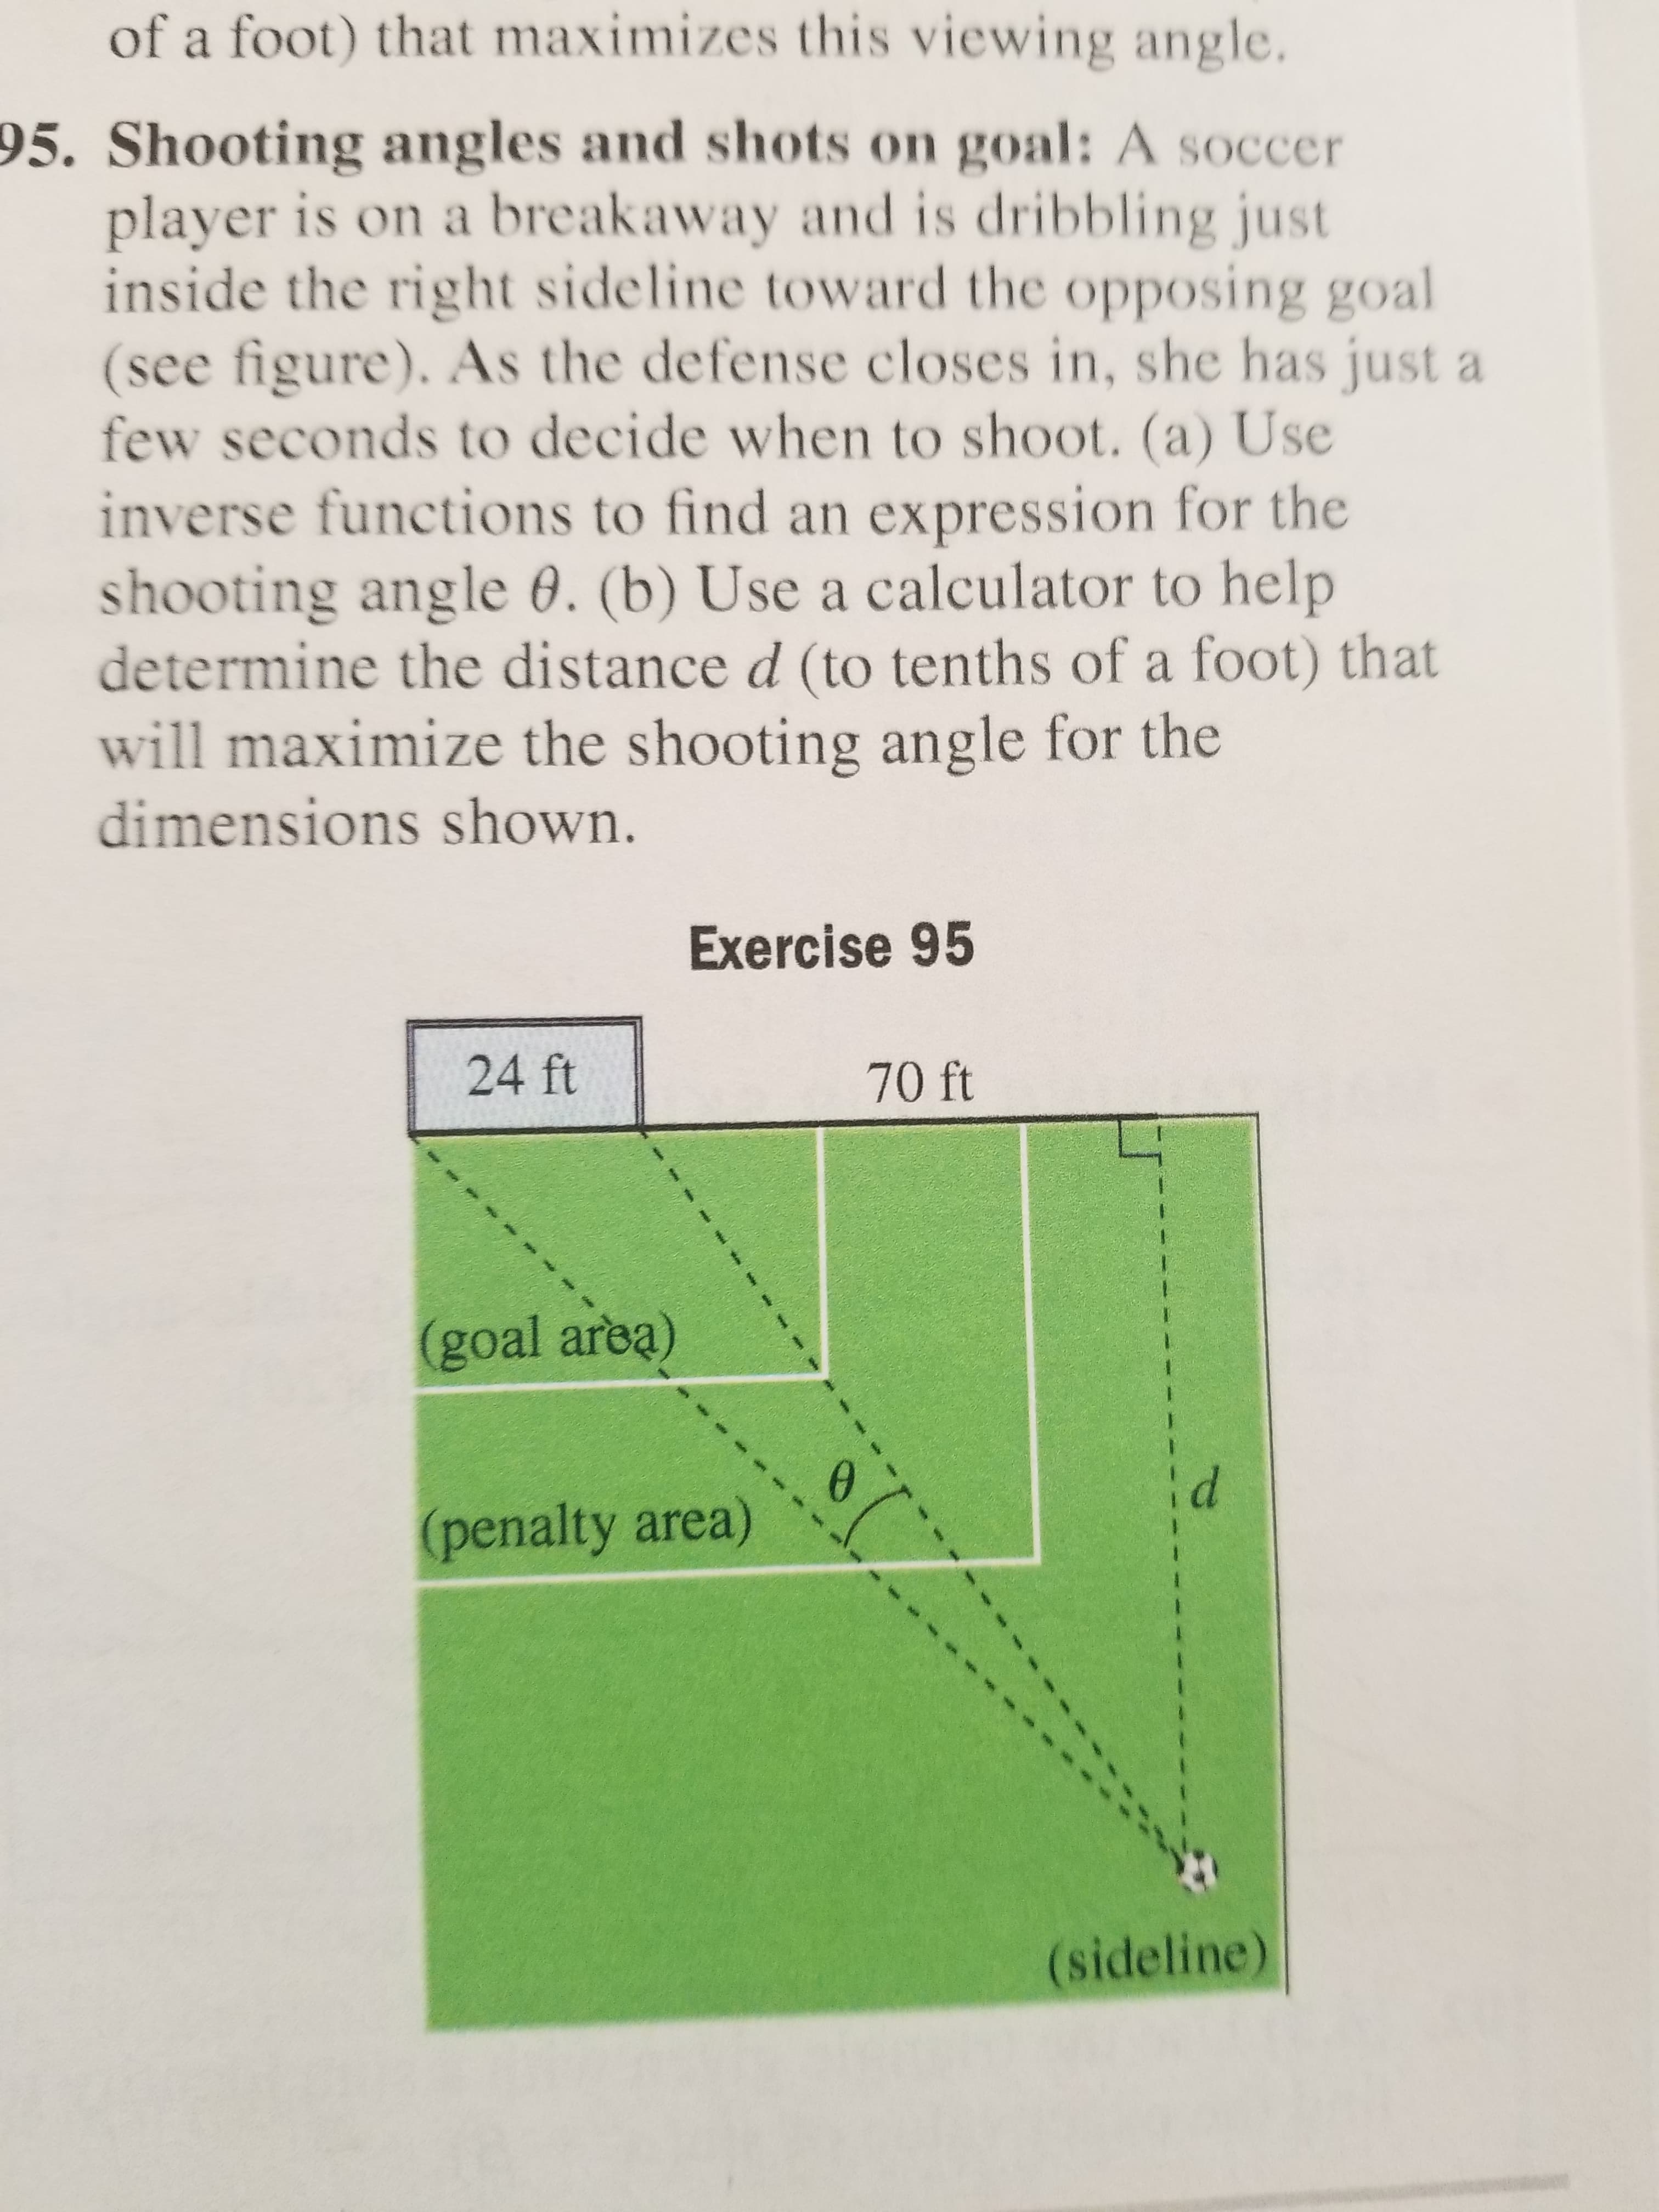 of a foot) that maximizes this viewing angle.
95. Shooting angles and shots on goal: A soccer
player is on a breakaway and is dribbling just
inside the right sideline toward the opposing goal
(see figure). As the defense closes in, she has just a
few seconds to decide when to shoot. (a) Use
inverse functions to find an expression for the
shooting angle 0. (b) Use a calculator to help
determine the distance d (to tenths of a foot) that
will maximize the shooting angle for the
dimensions shown.
Exercise 95
24 ft
70 ft
(goal area)
(penalty area)
(sideline)
